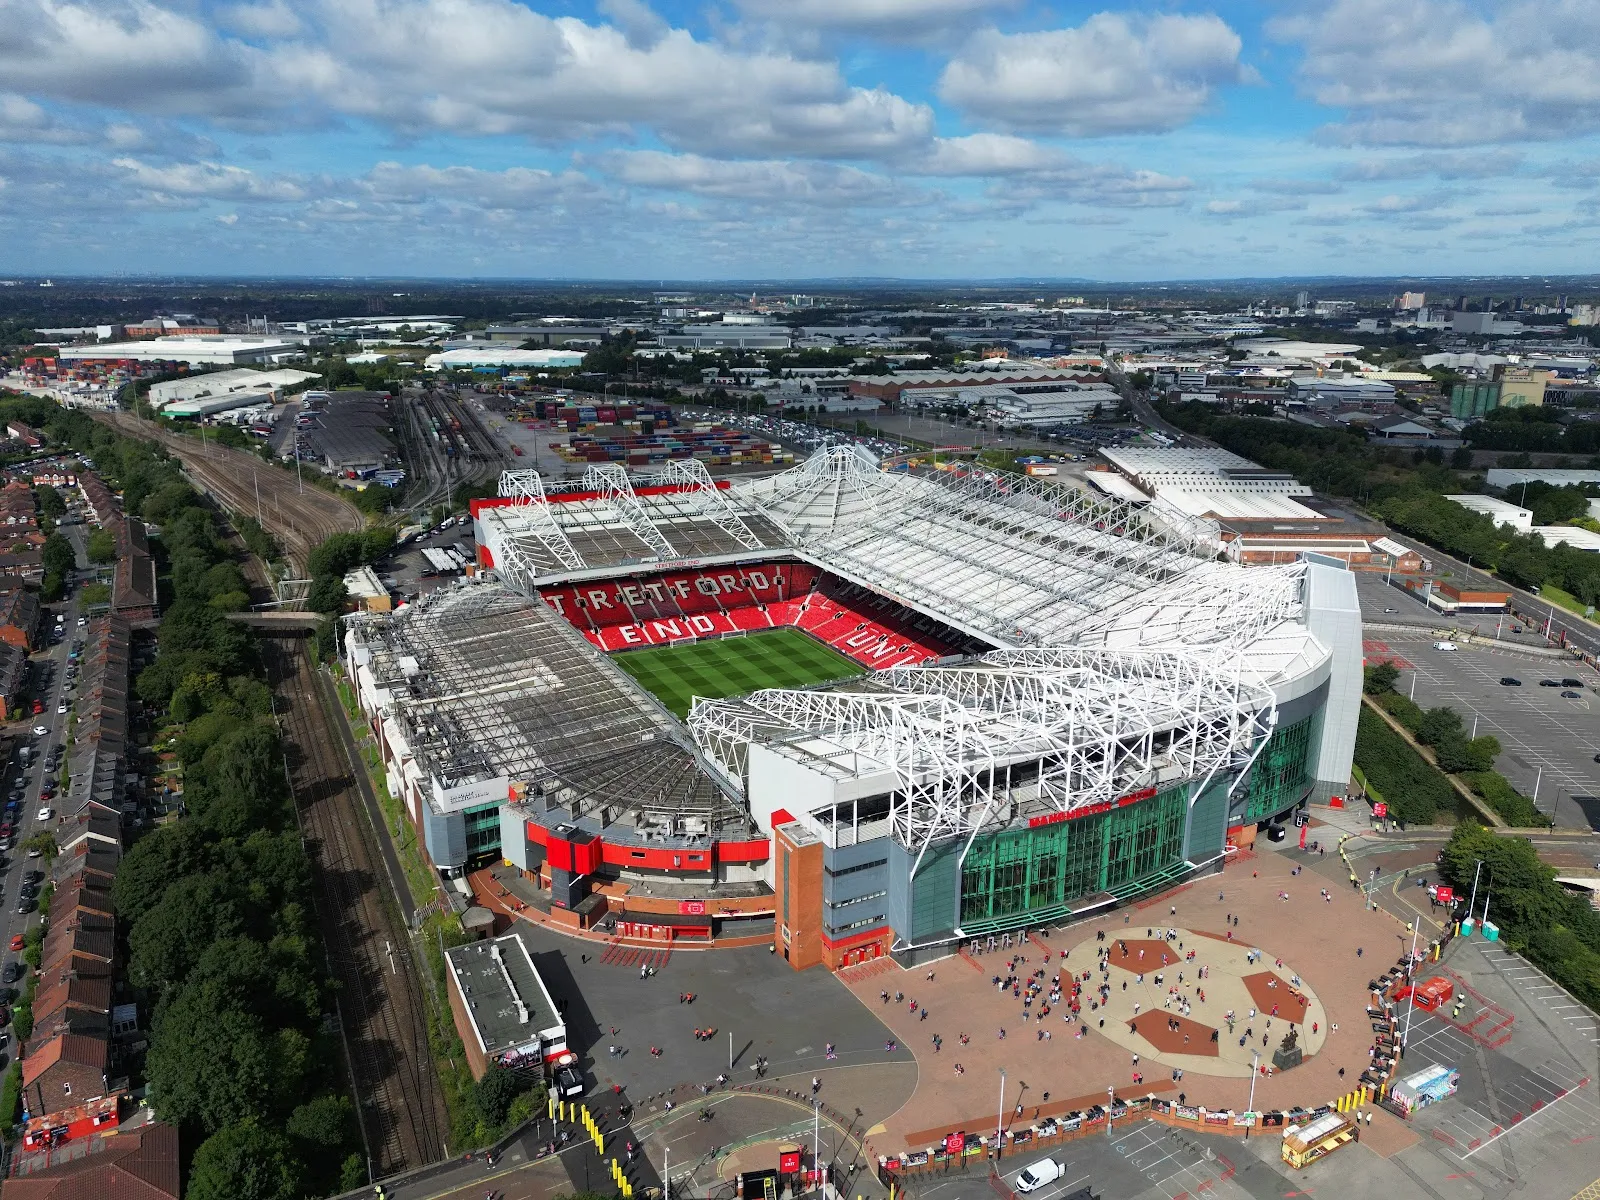 The dire state of Old Trafford has been criticised by Manchester United fans